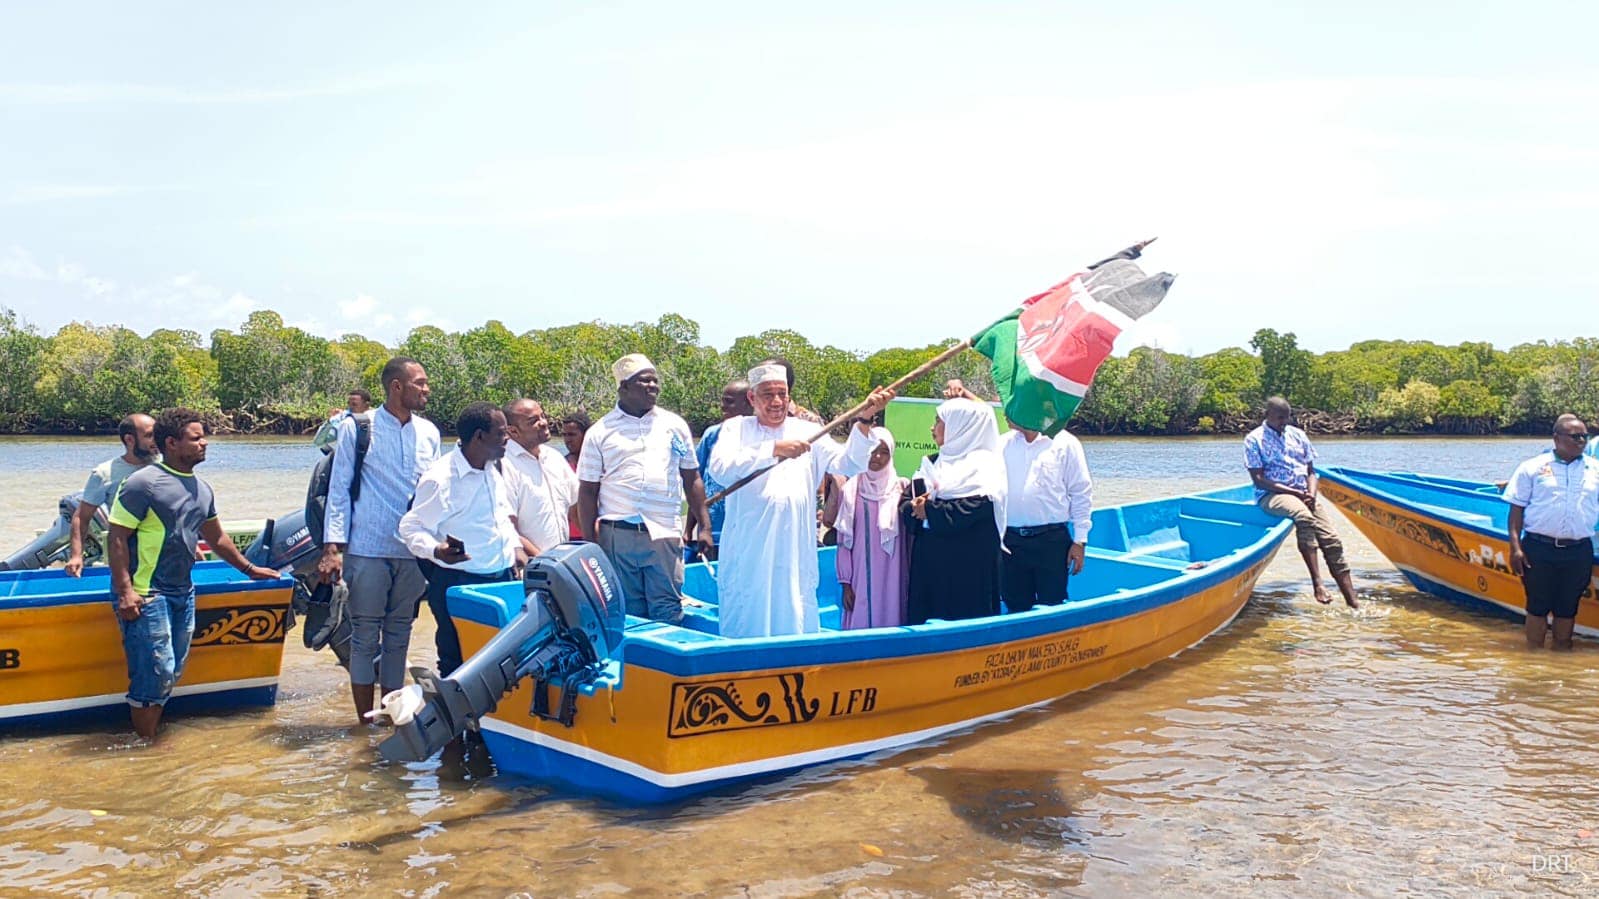 GOVERNOR TIMAMY DELIVERS 147 HEIFERS, 21 BULLS, FIBER BOATS AND OUTBOARD ENGINES IN LAMU EAST